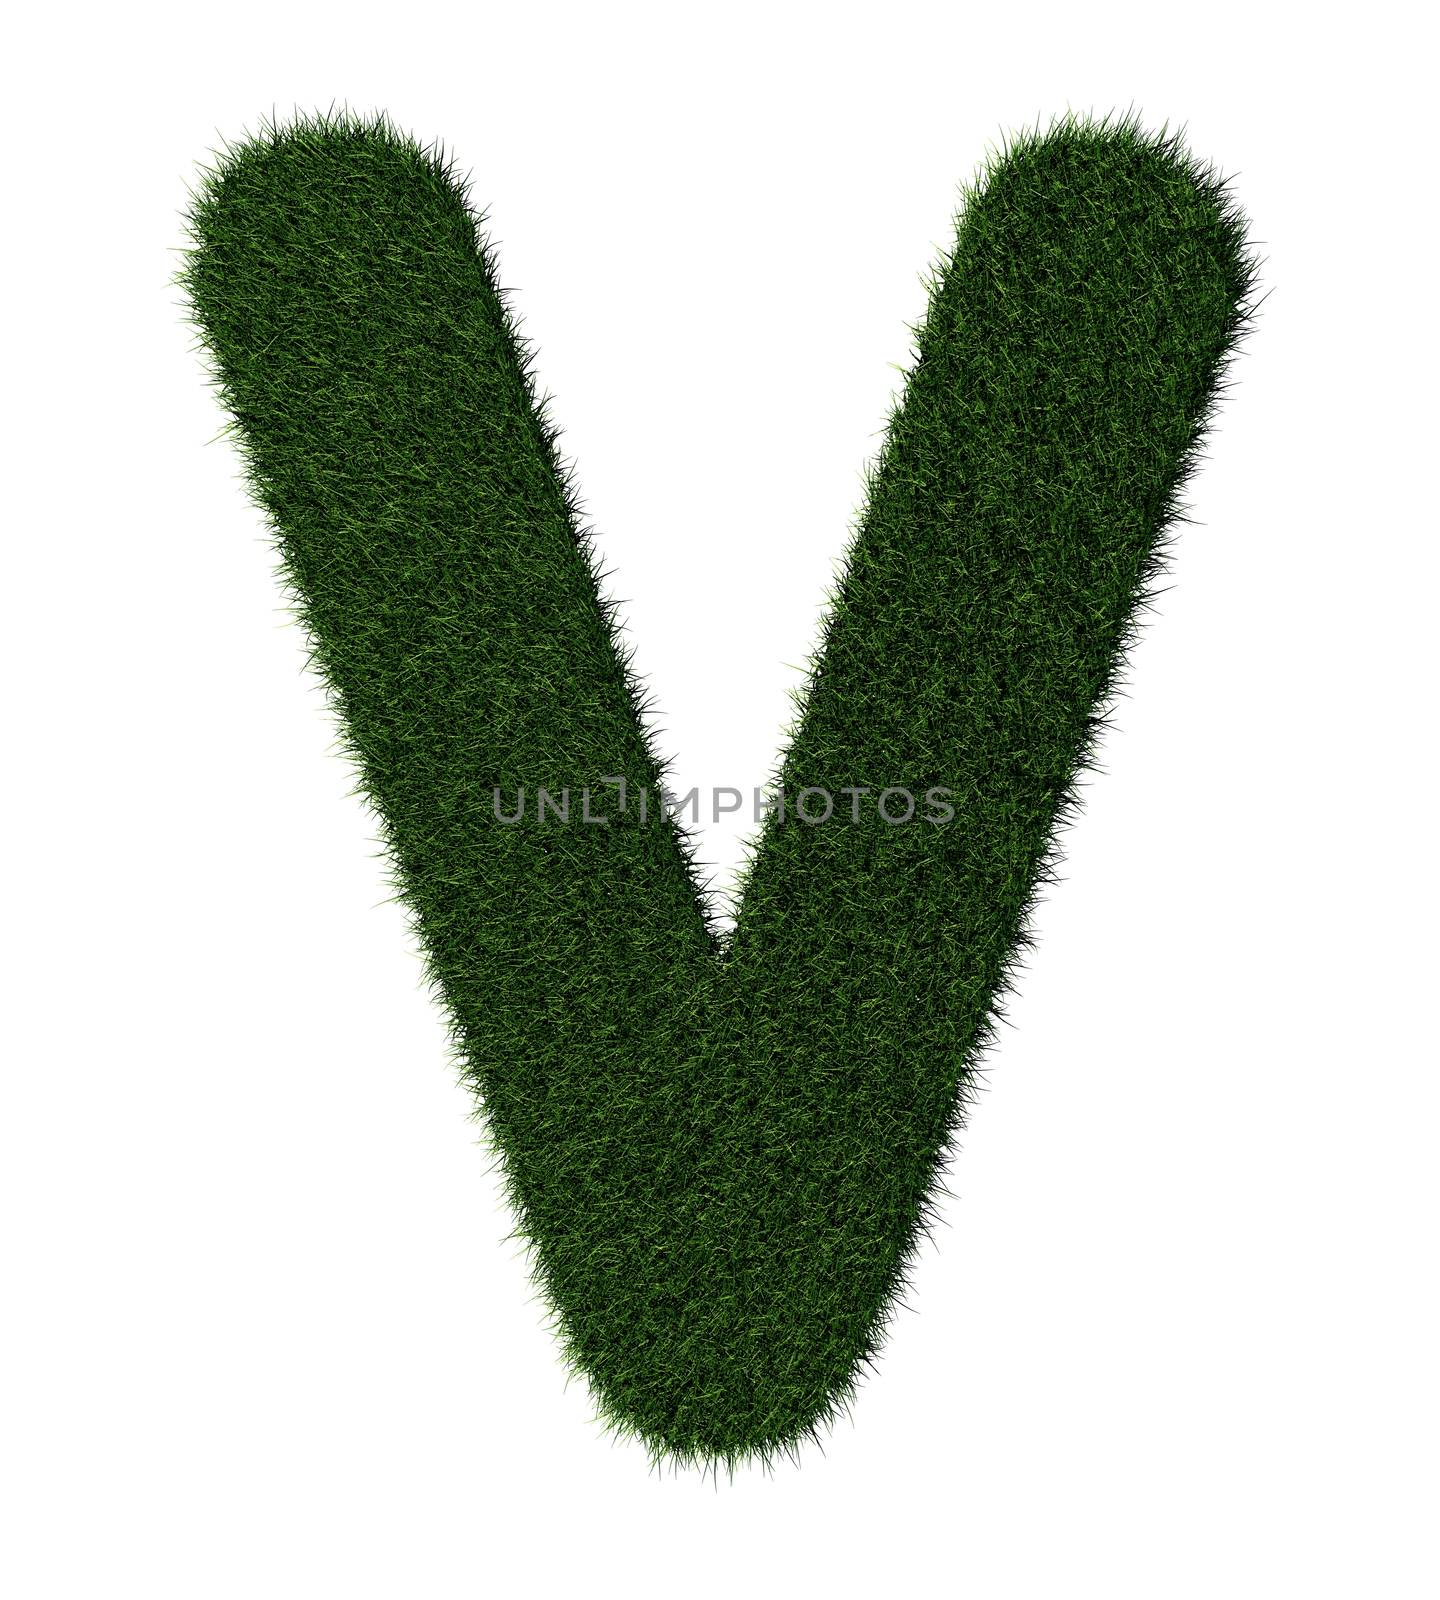 Letter V made with blades of grass